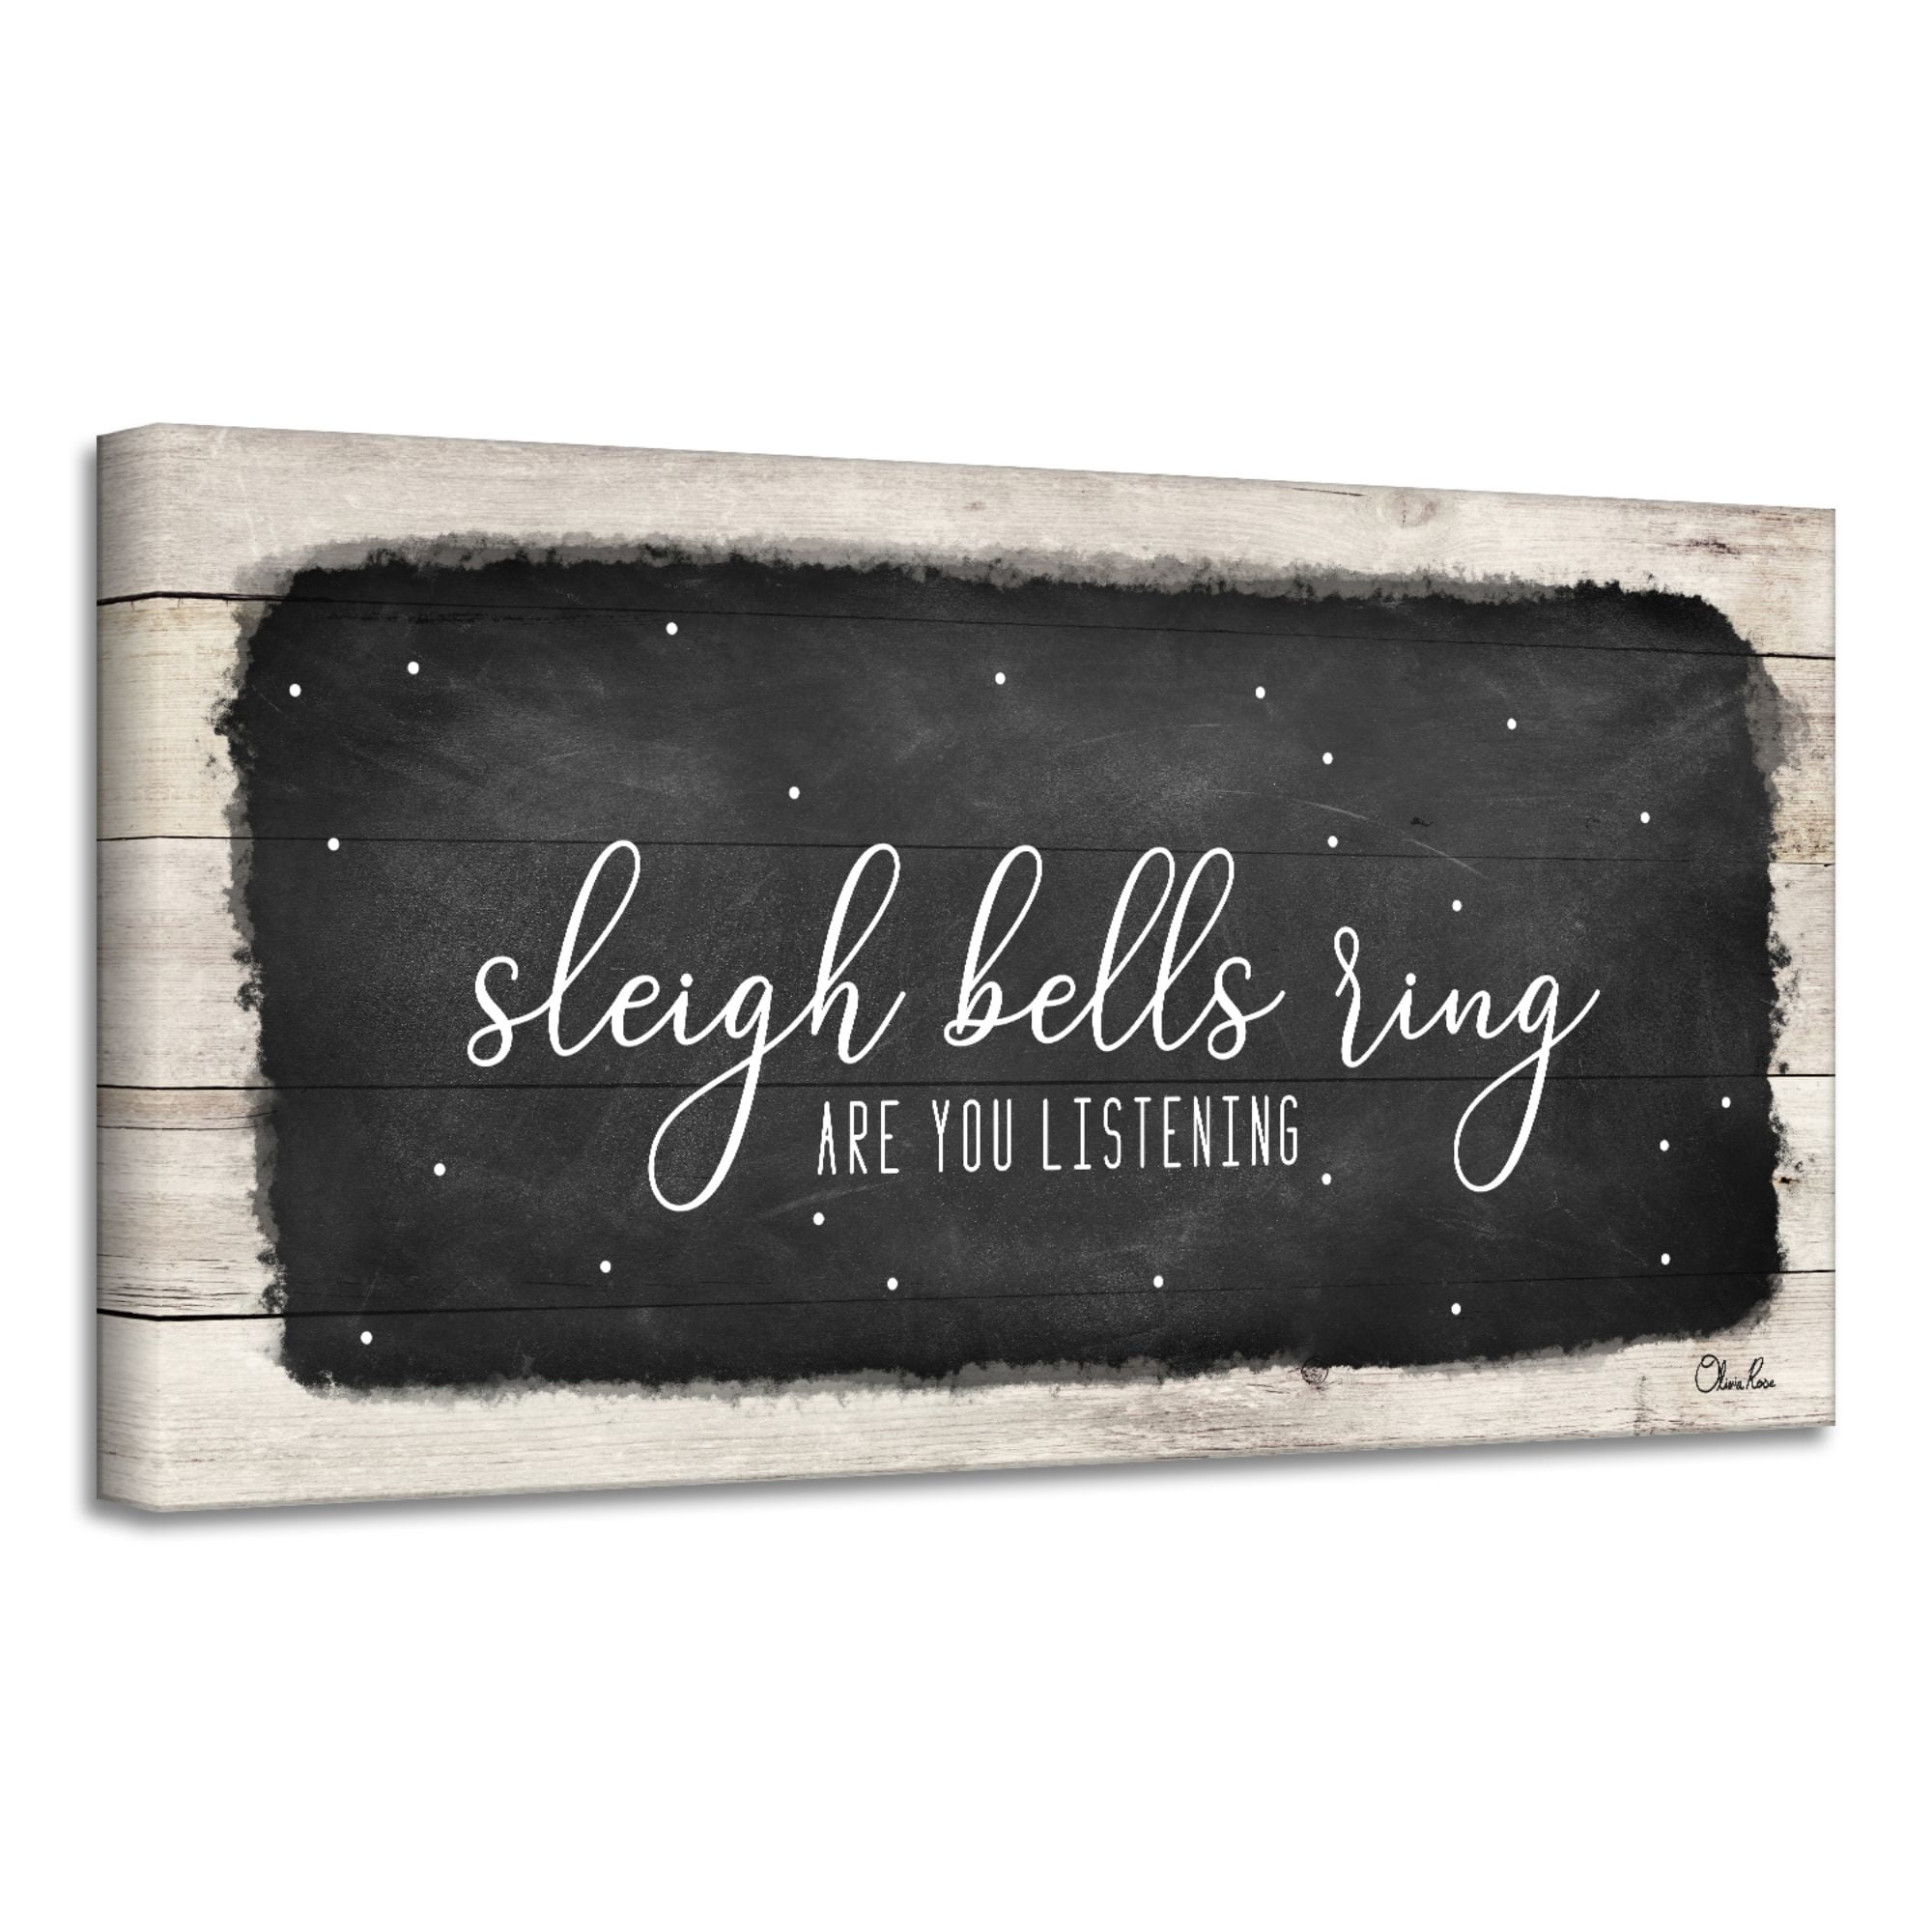 Slay Bells Ring (Vamps in the Vineyard) by Amy Cissell